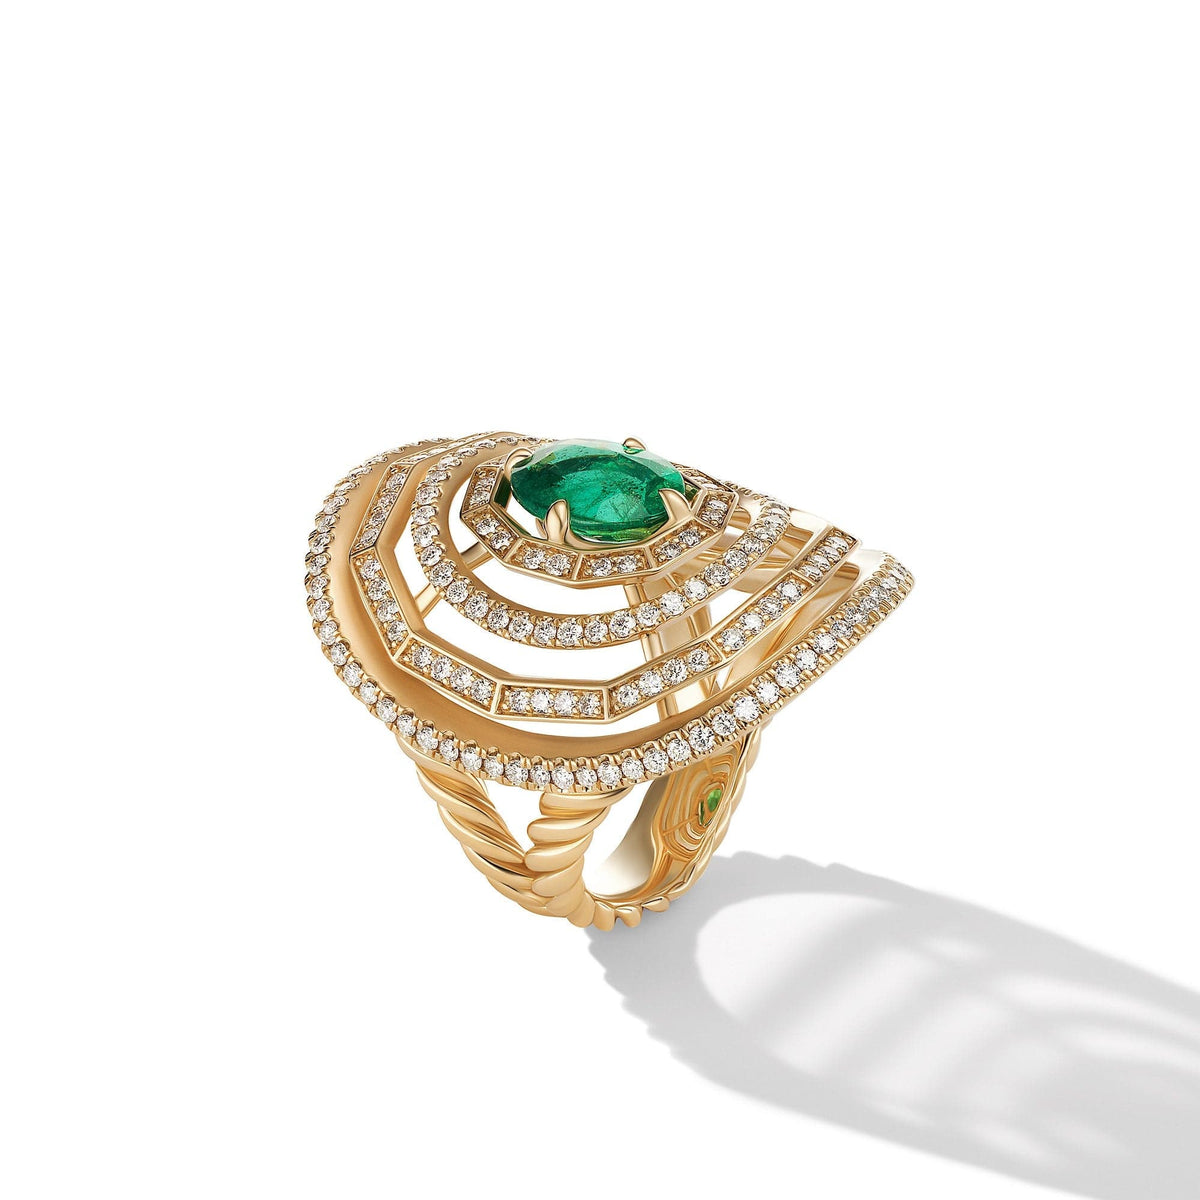 Stax Stone Ring in 18K Yellow Gold with Full Pavé Diamonds and Emerald